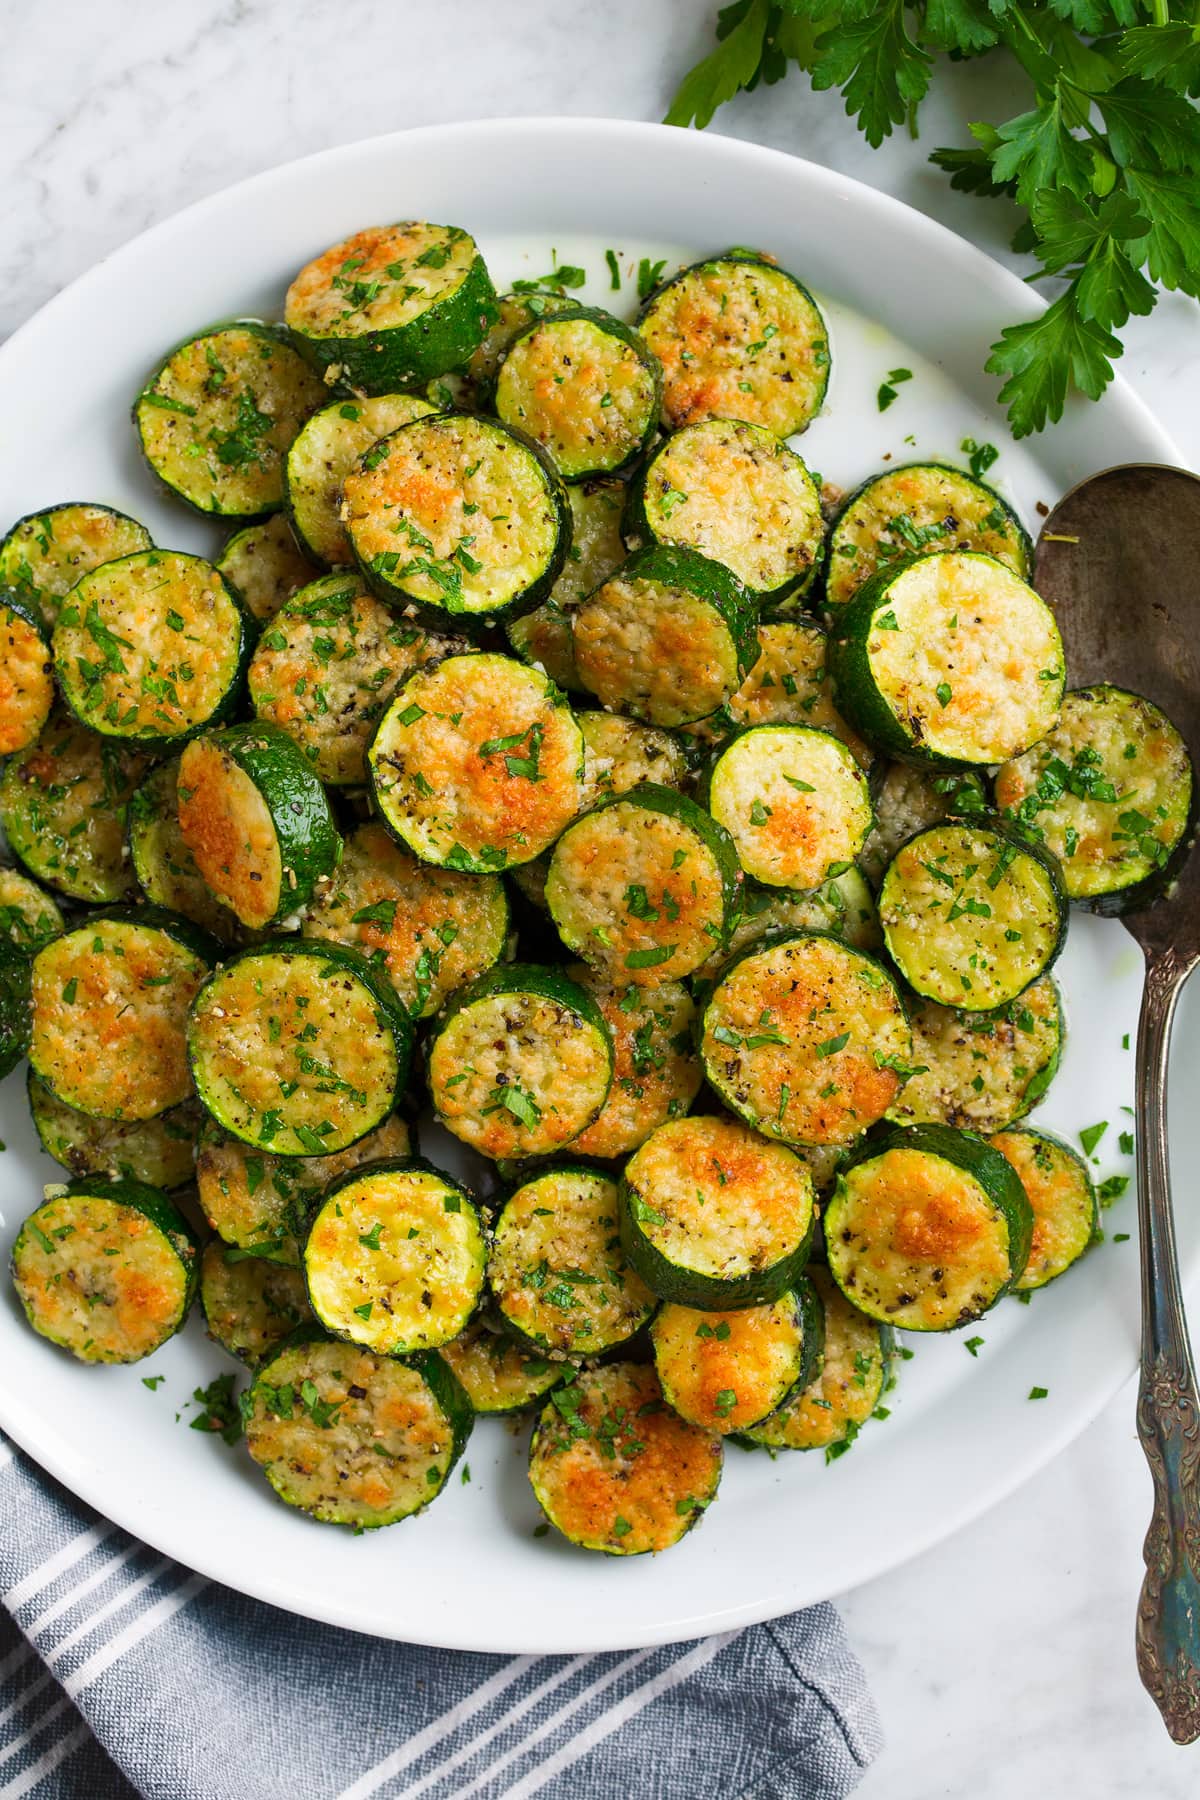 Baked zucchini coins covered with parmesan shown overhead on a white plate.